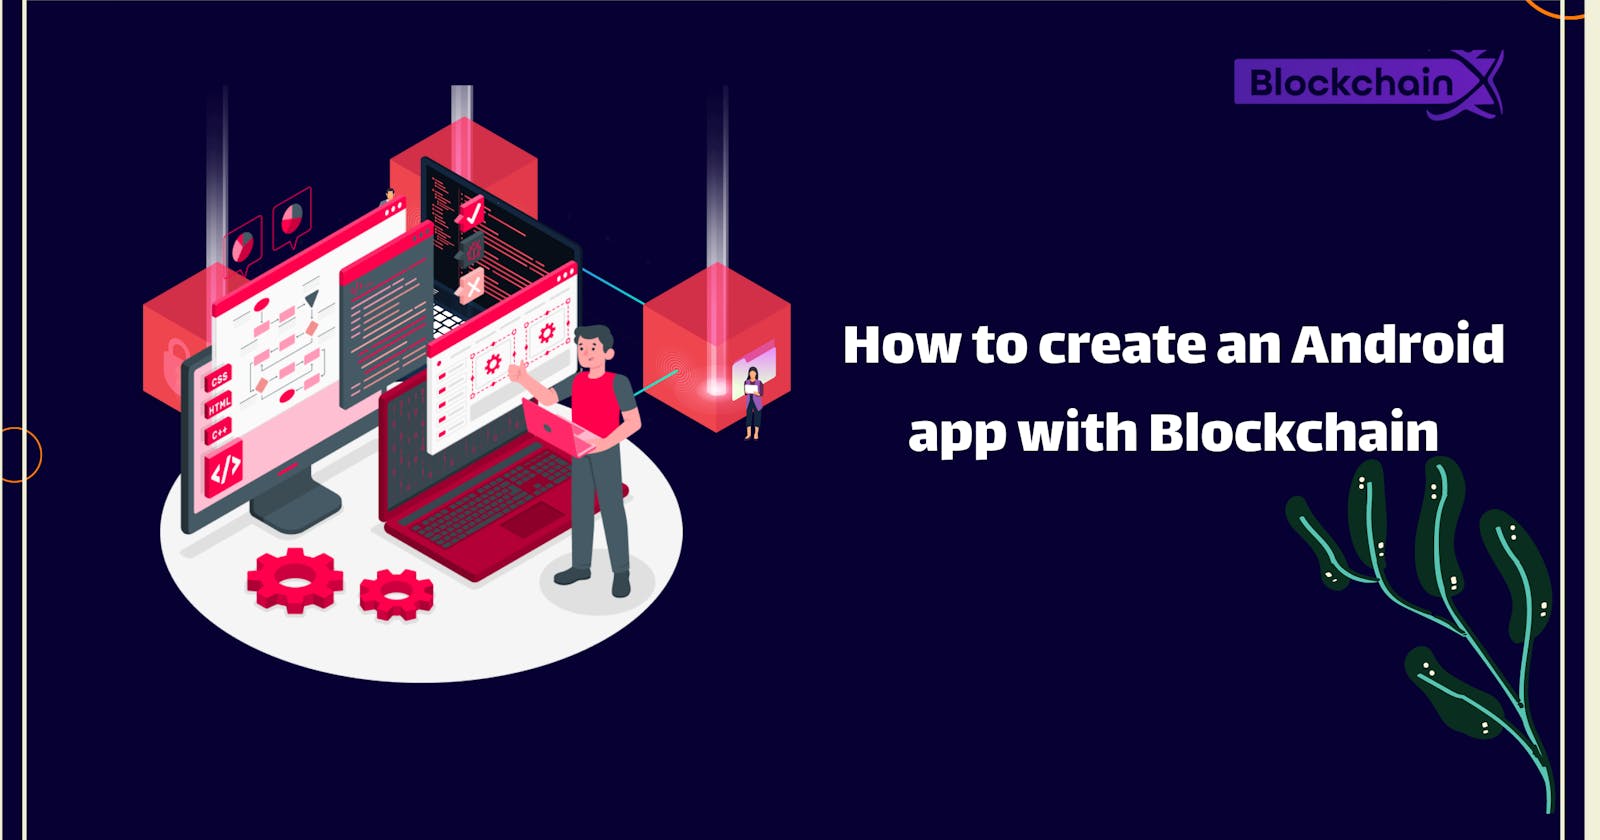 How to create an Android app with Blockchain: